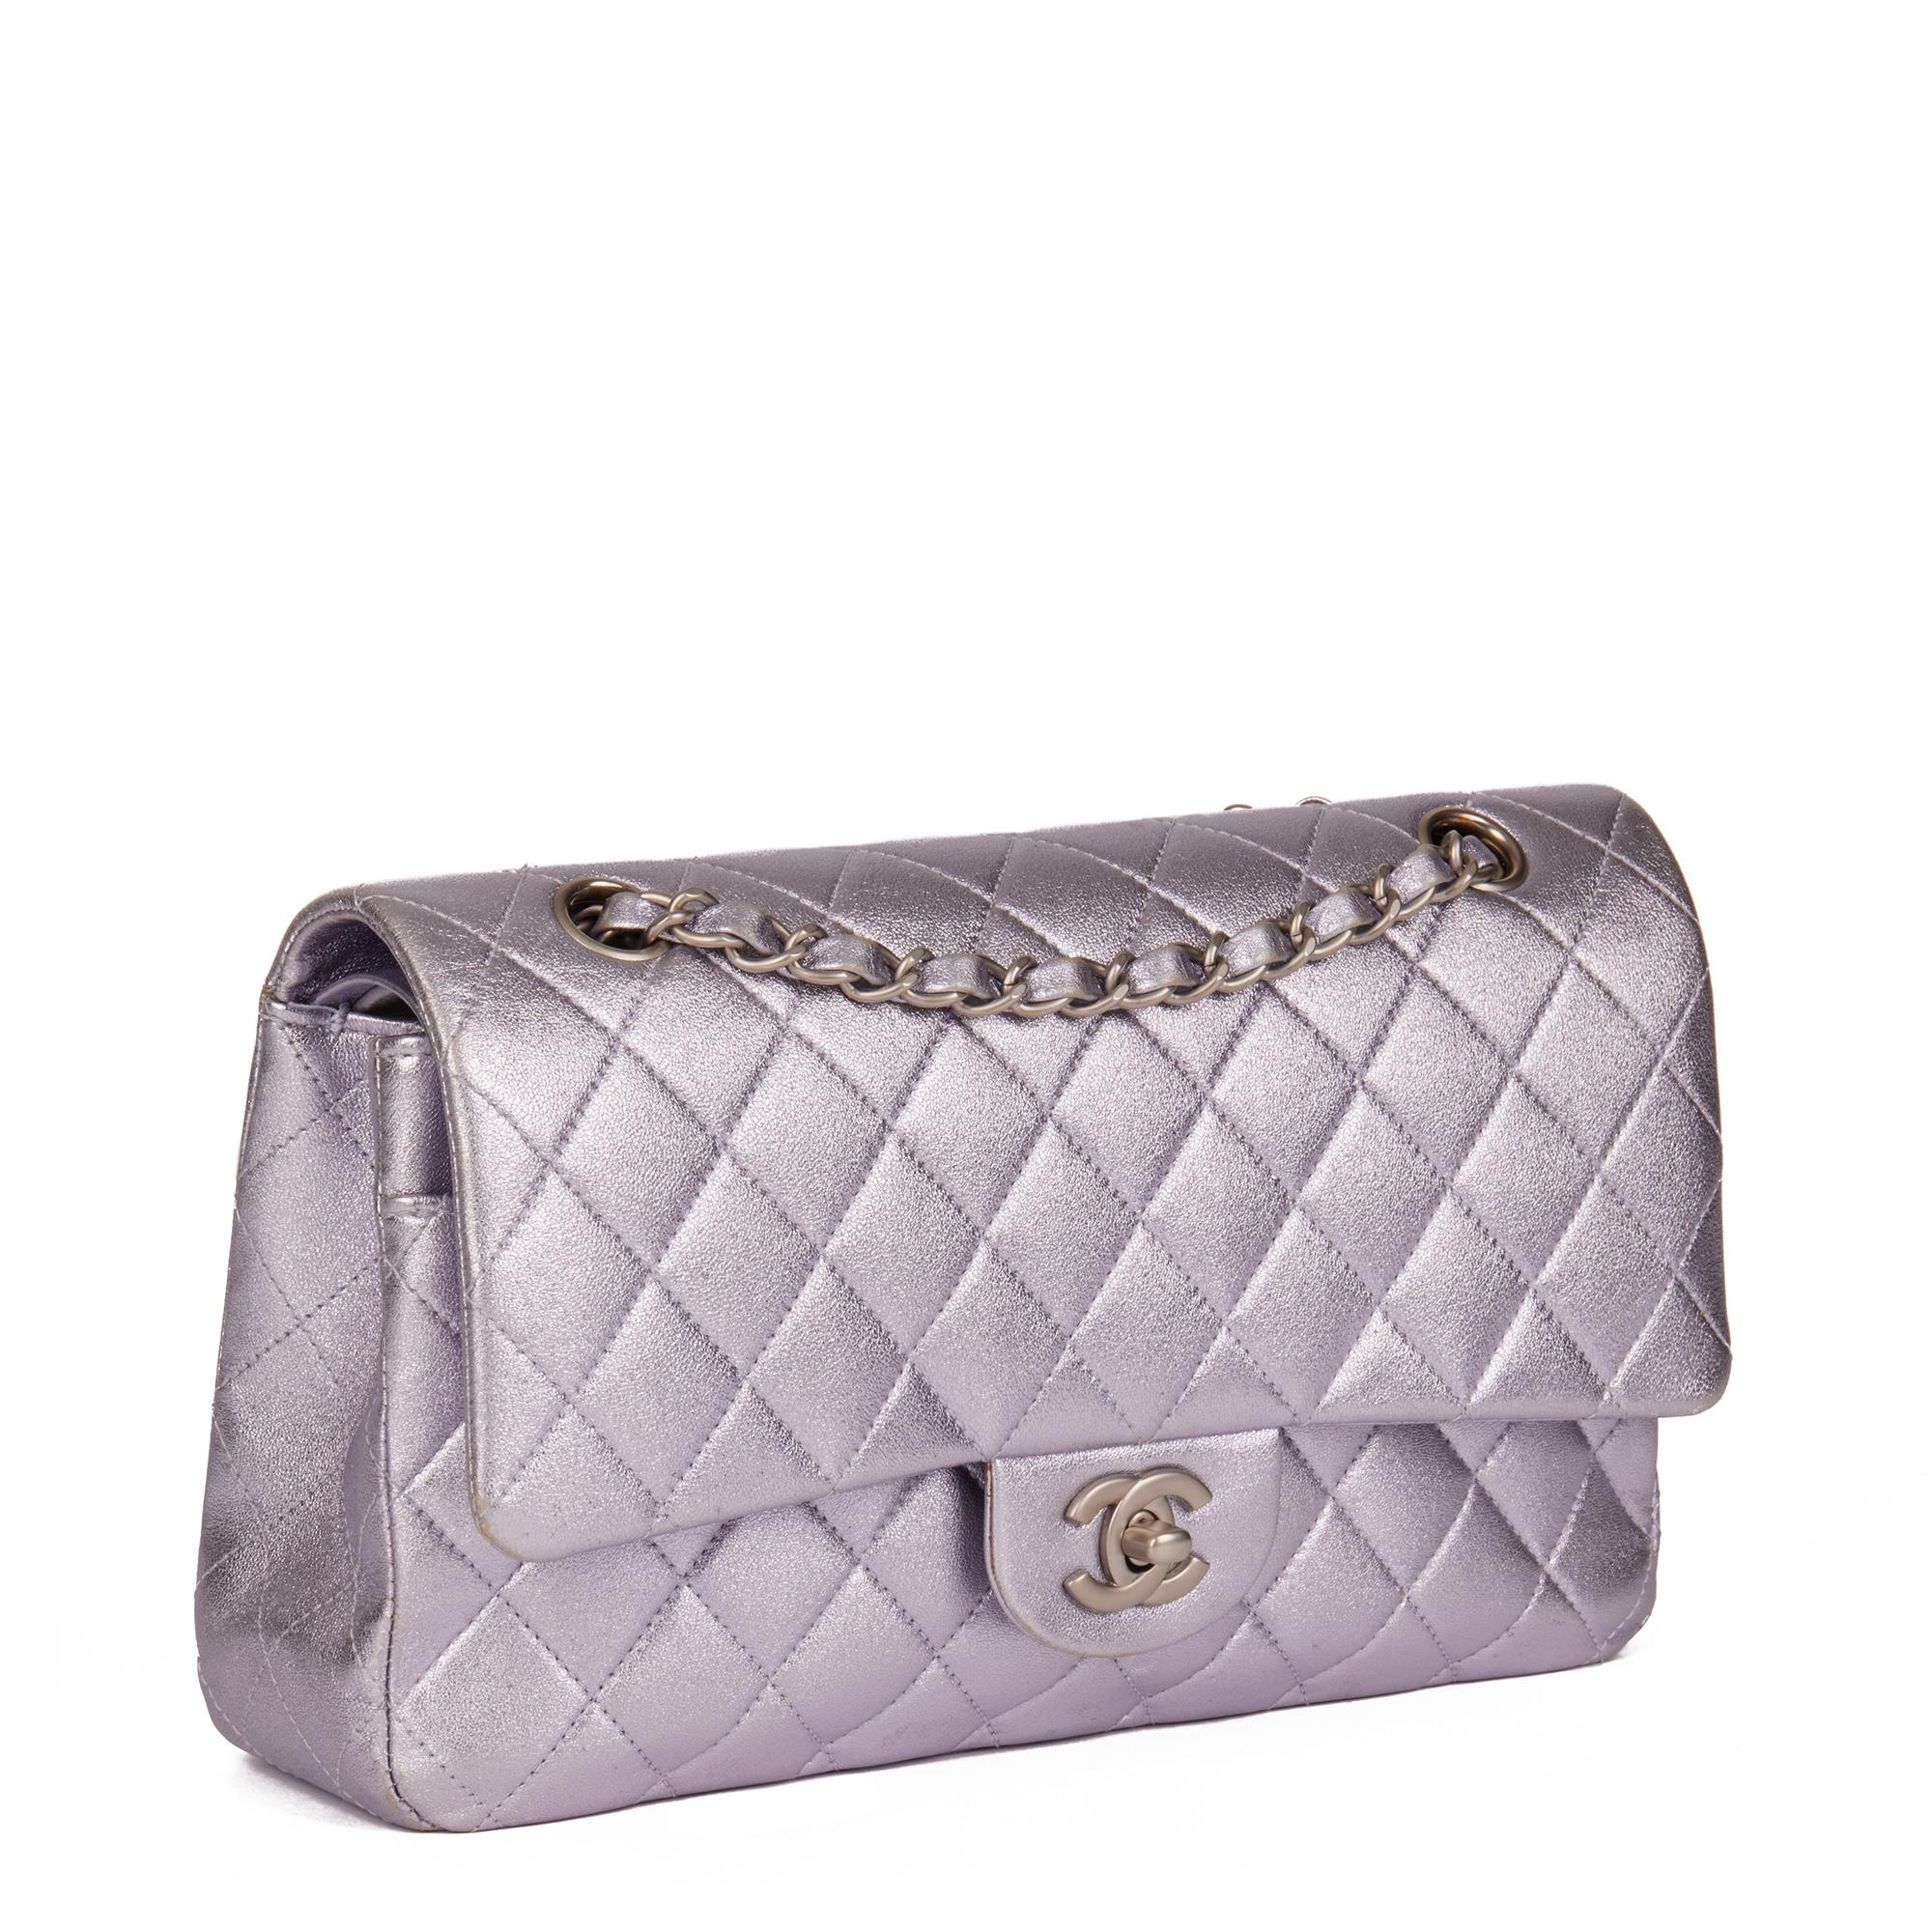 CHANEL
Pale Purple Quilted Metallic Lambskin Medium Classic Double Flap Bag

Xupes Reference: HB4348
Serial Number: 14876829
Age (Circa): 2010
Accompanied By: Chanel Dust Bag, Box, Authenticity Card, Care Booklet
Authenticity Details: Authenticity